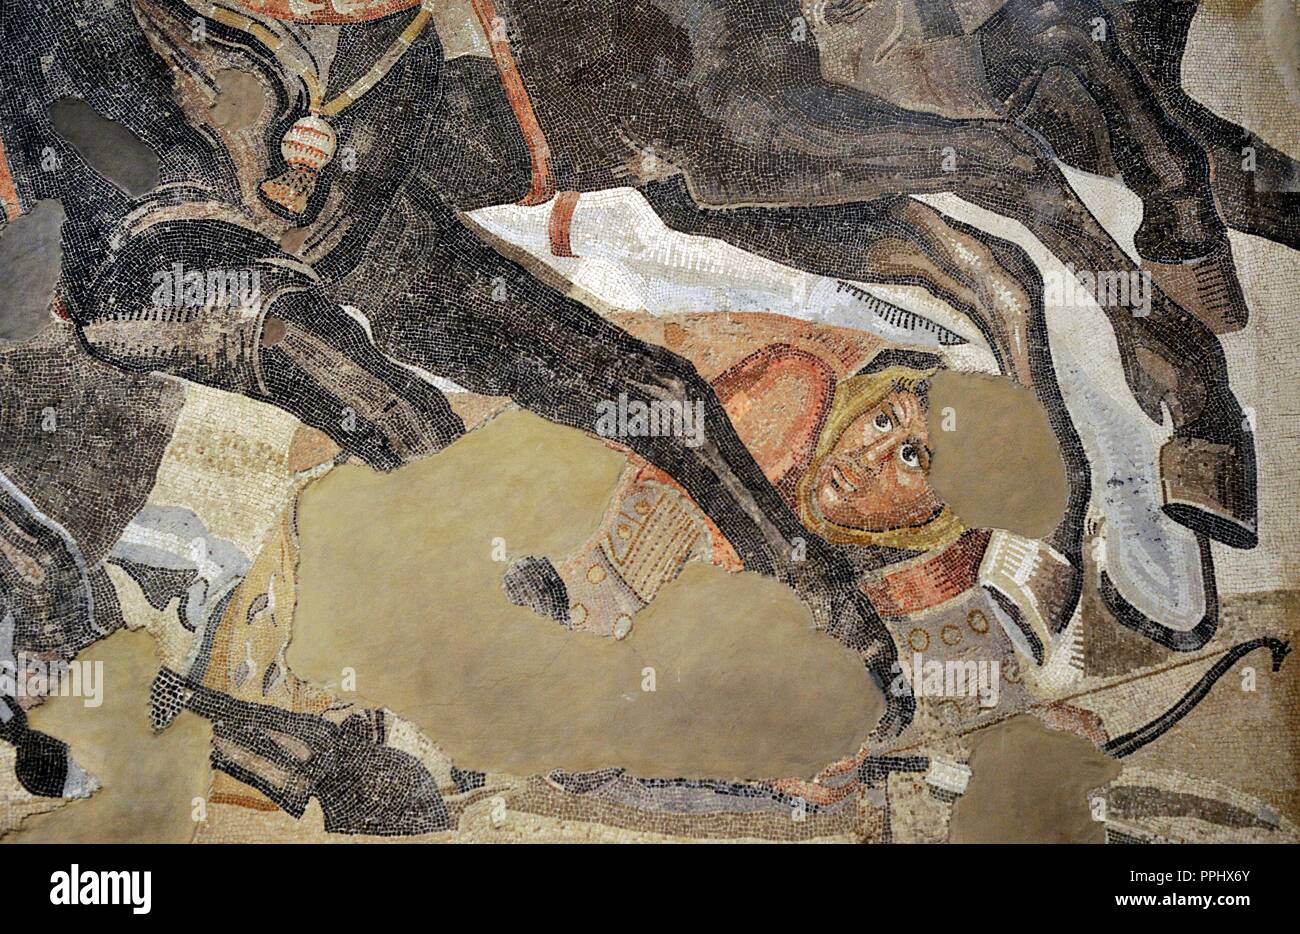 Alexander Mosaic. Battle of Issus (333 B.C.). Battle between Alexander the Great and the Achaemenid Empire, Darius III. Mosaic. Pompei, Casa del Fauno (VI, 12, 2). 2nd century AD. Detail. Persian soldier. National Archaeological Museum, Naples. Italy. Stock Photo